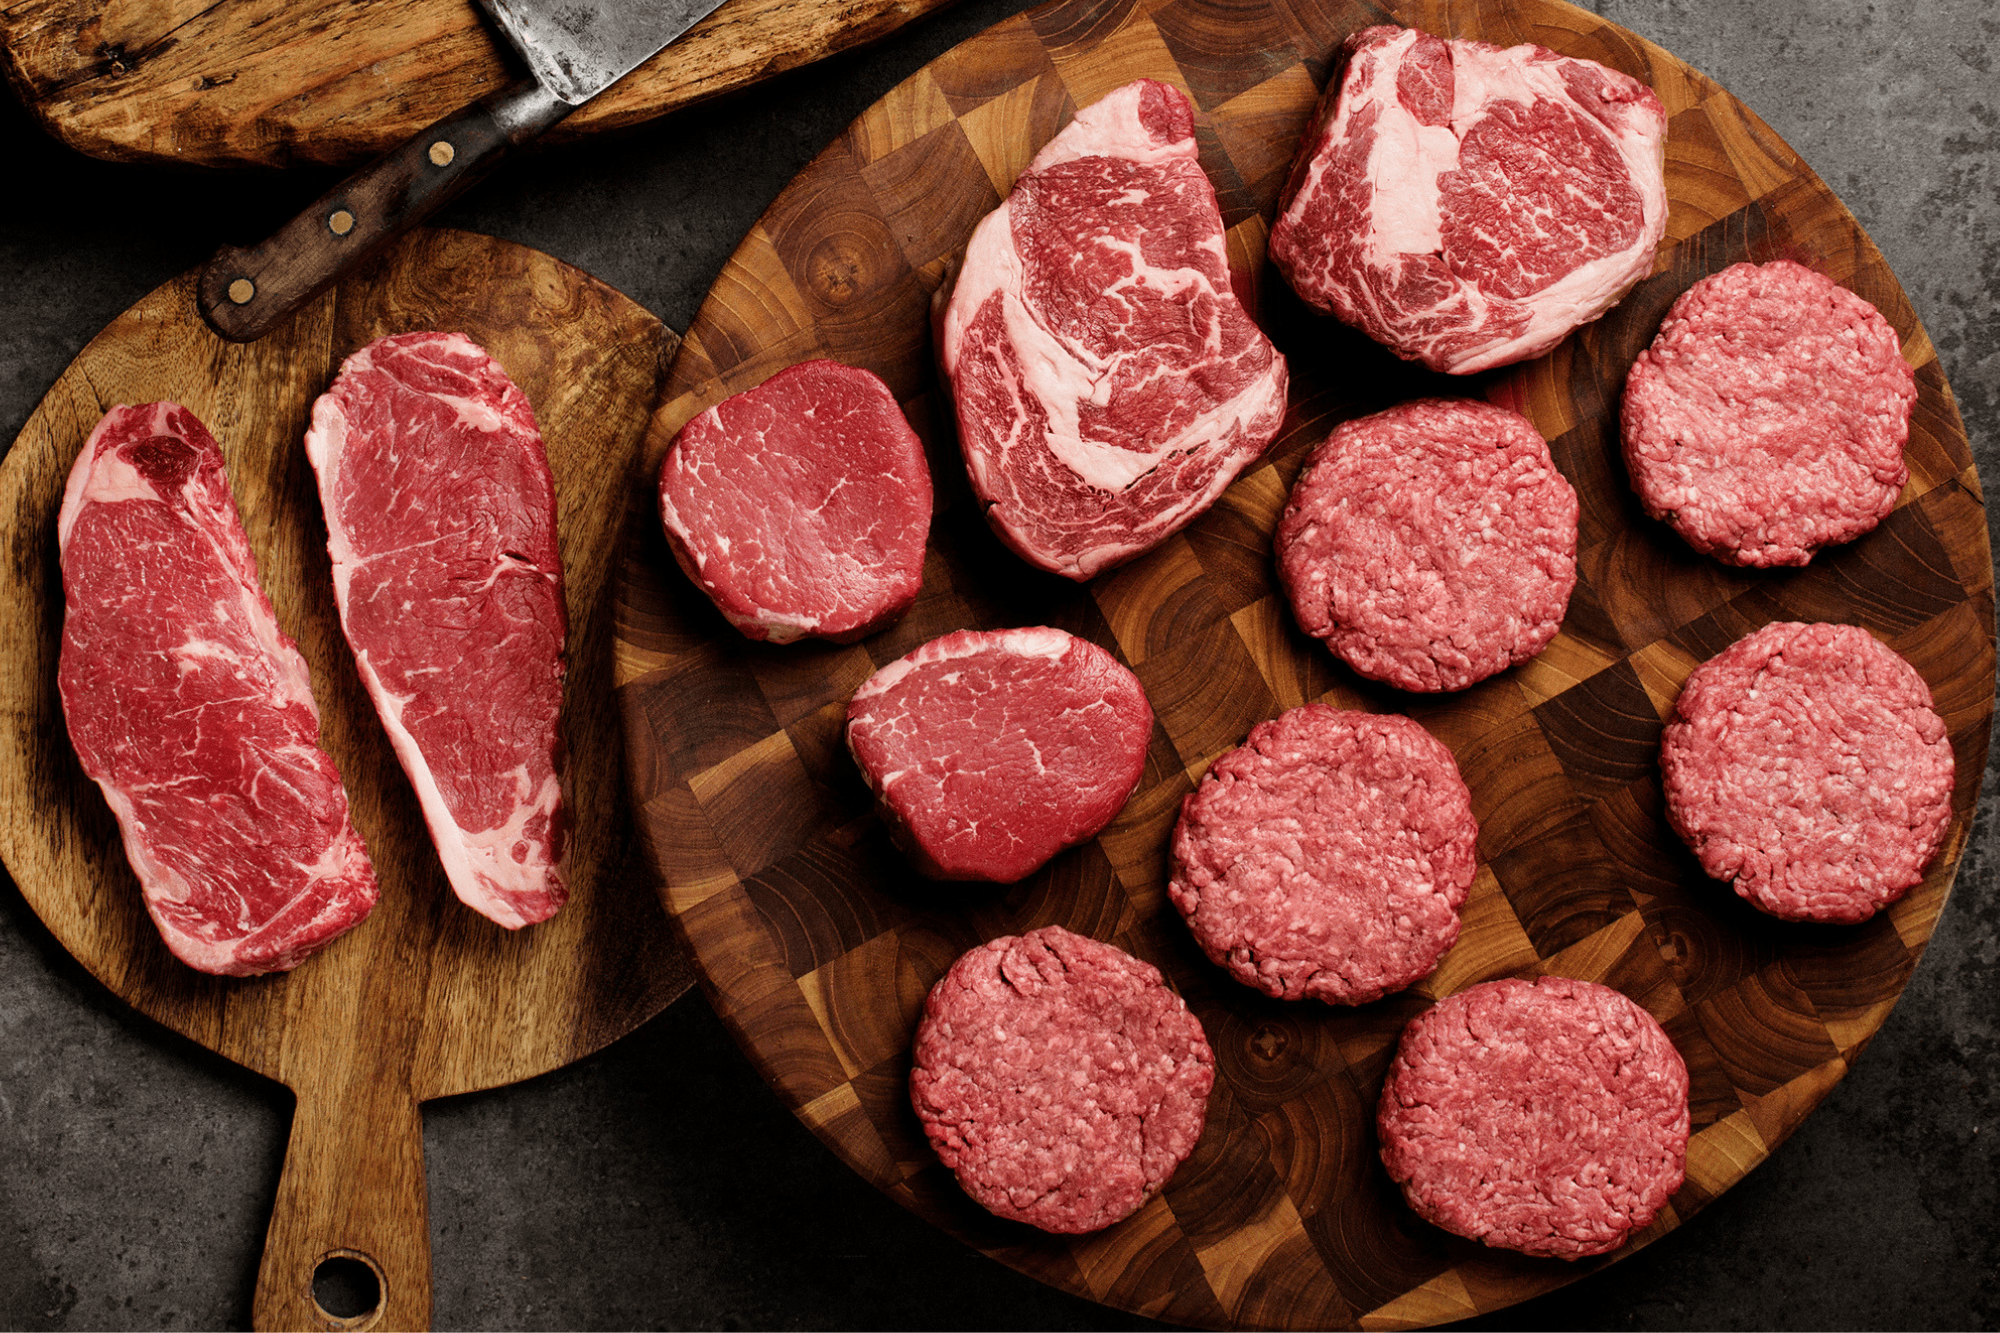 USDA Grading 101: What is Prime Beef?